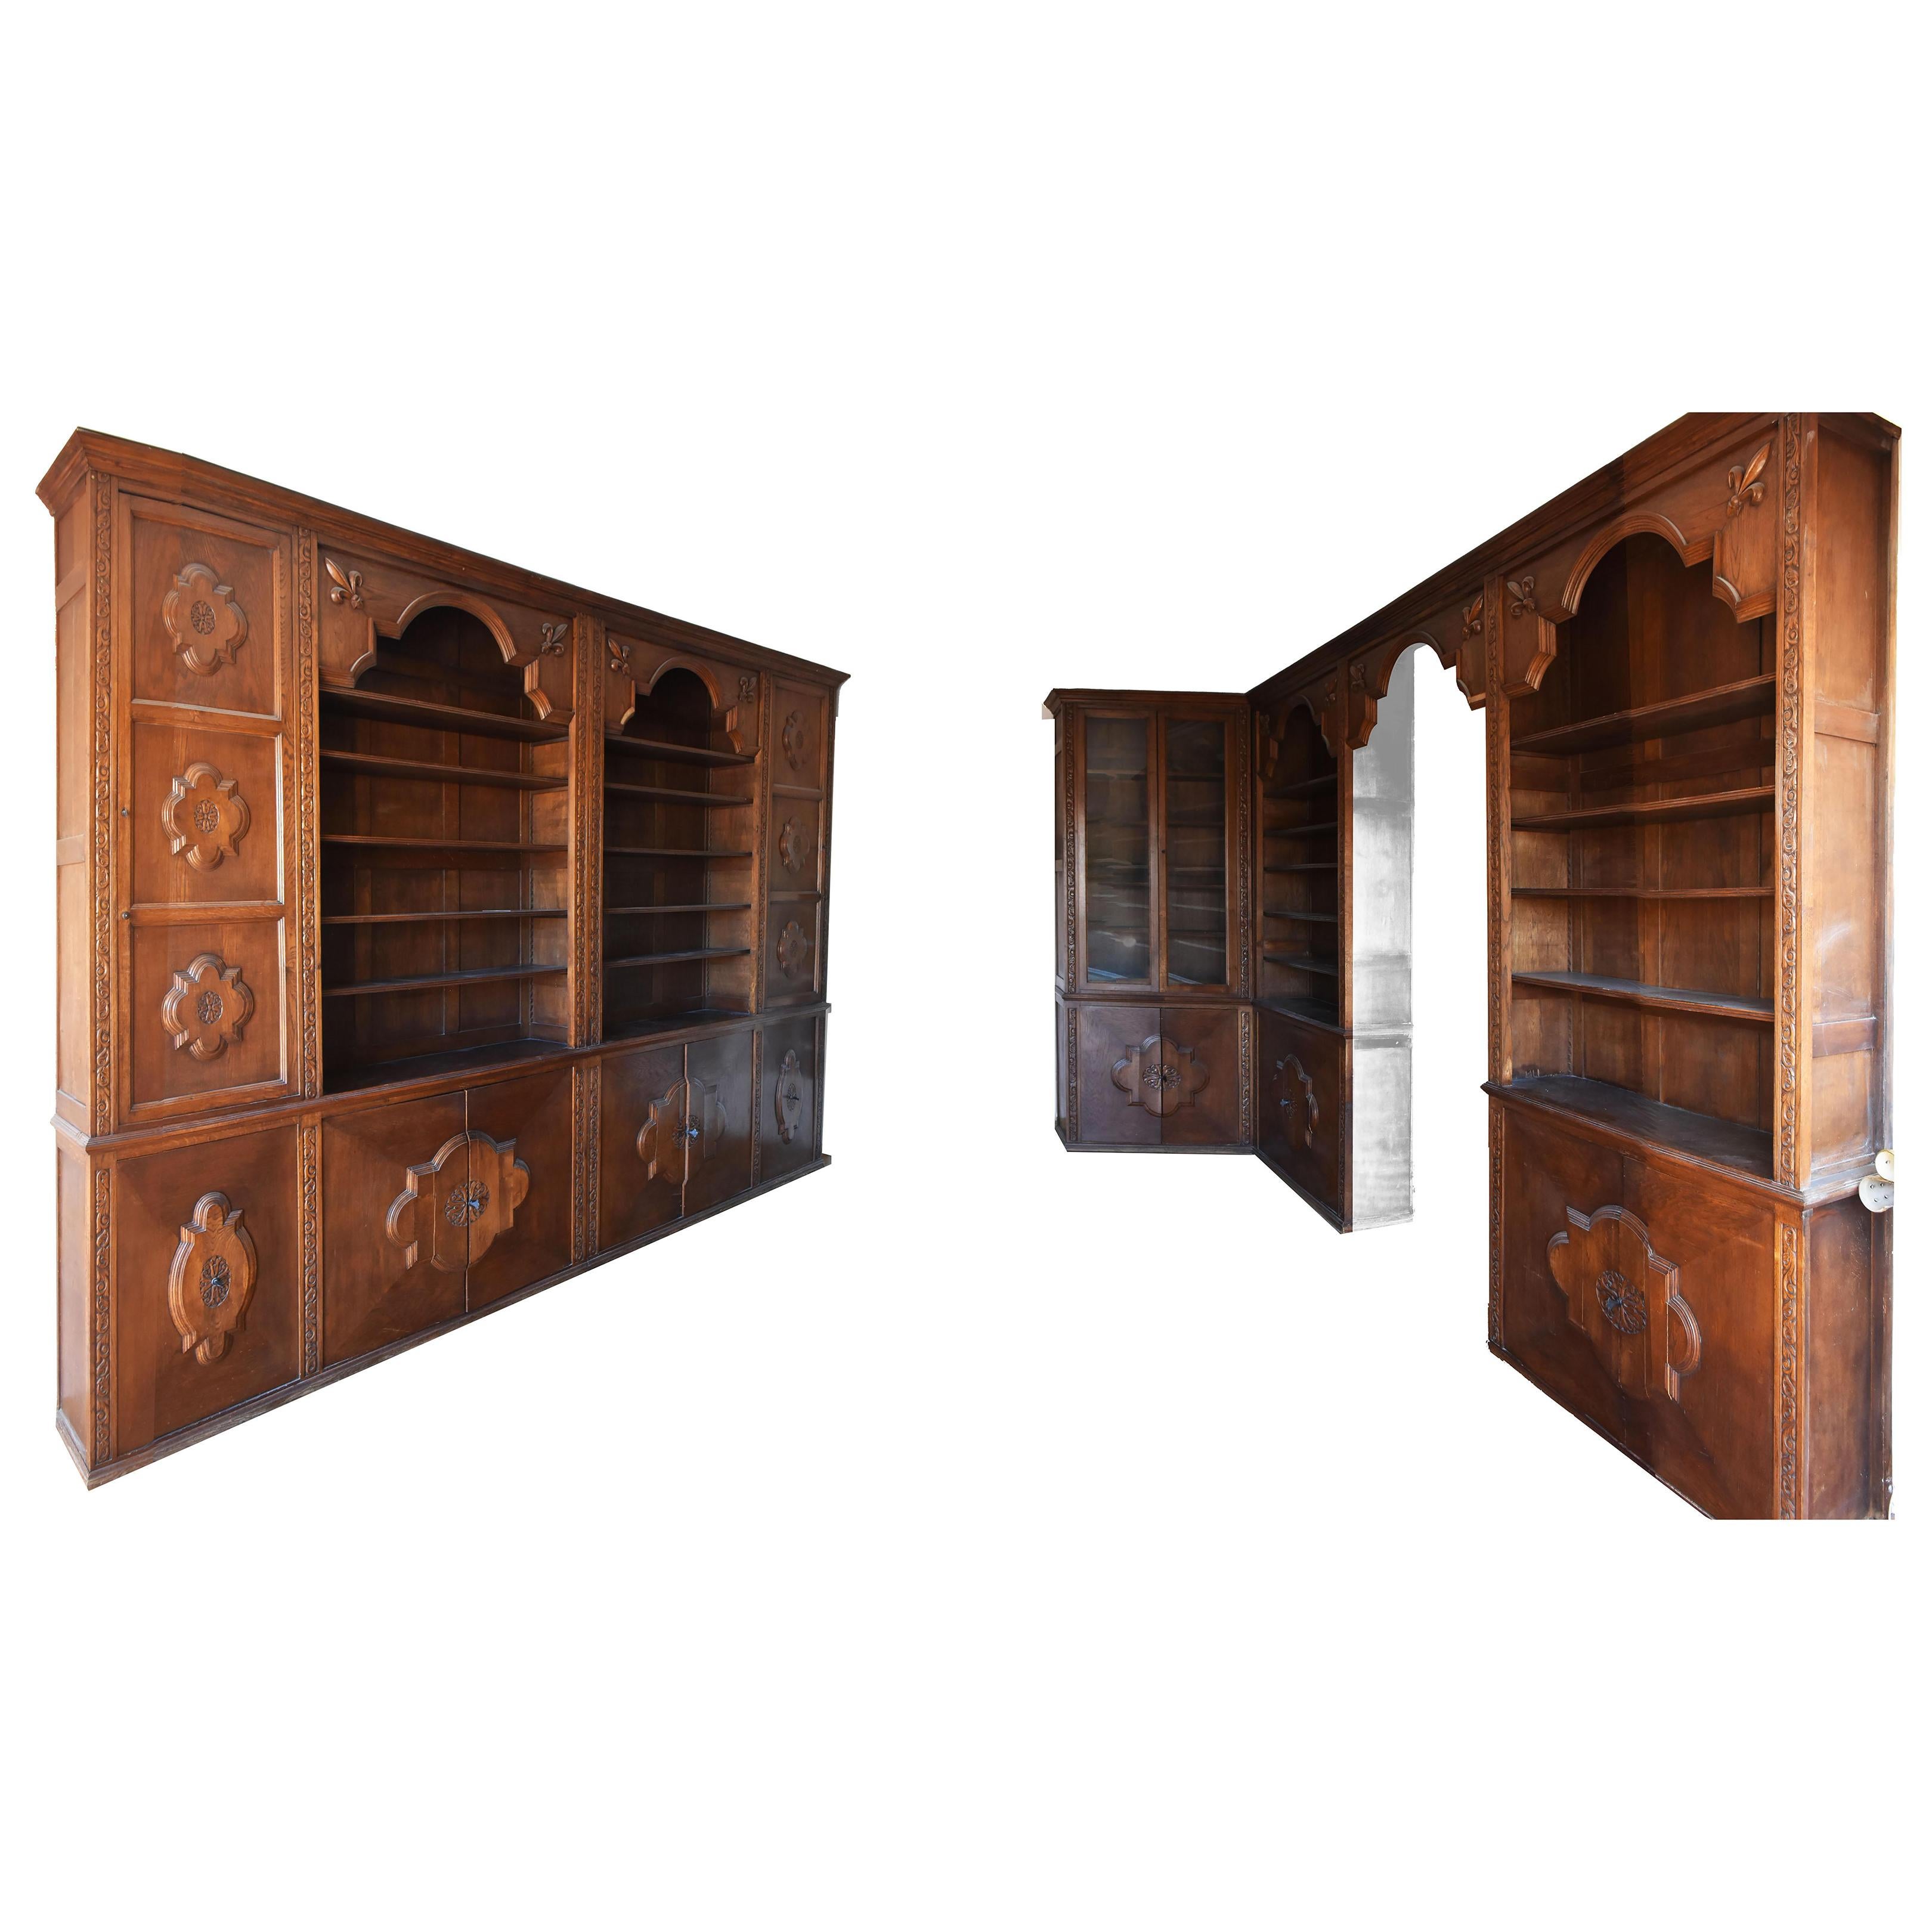 Pharmacy Woodwork Used as Library, circa 1900 For Sale